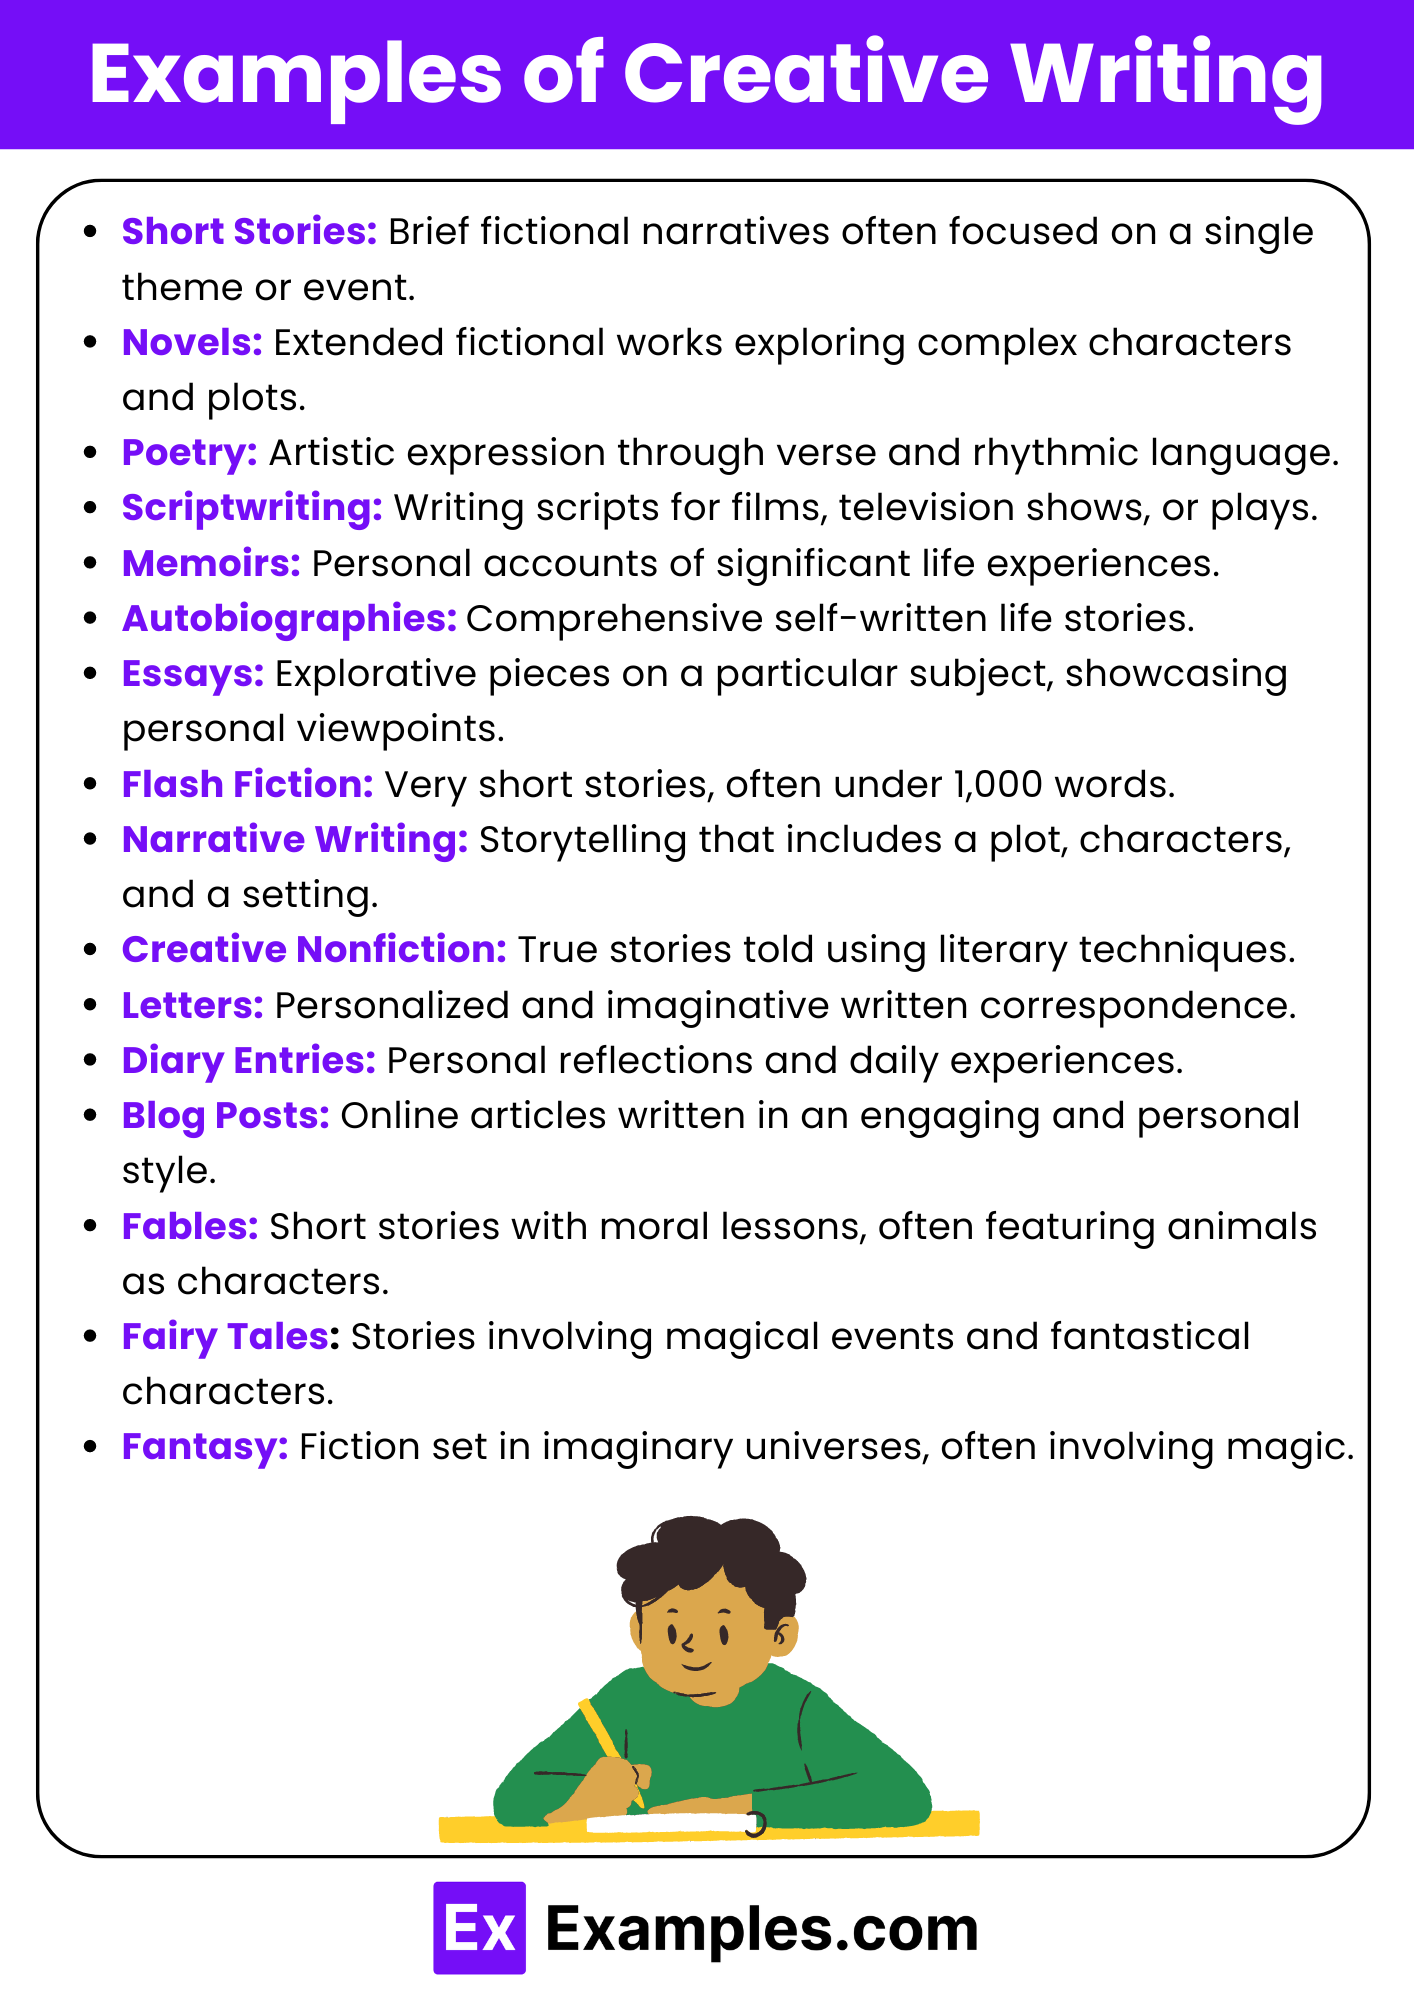 Examples-of-Creative-Writing